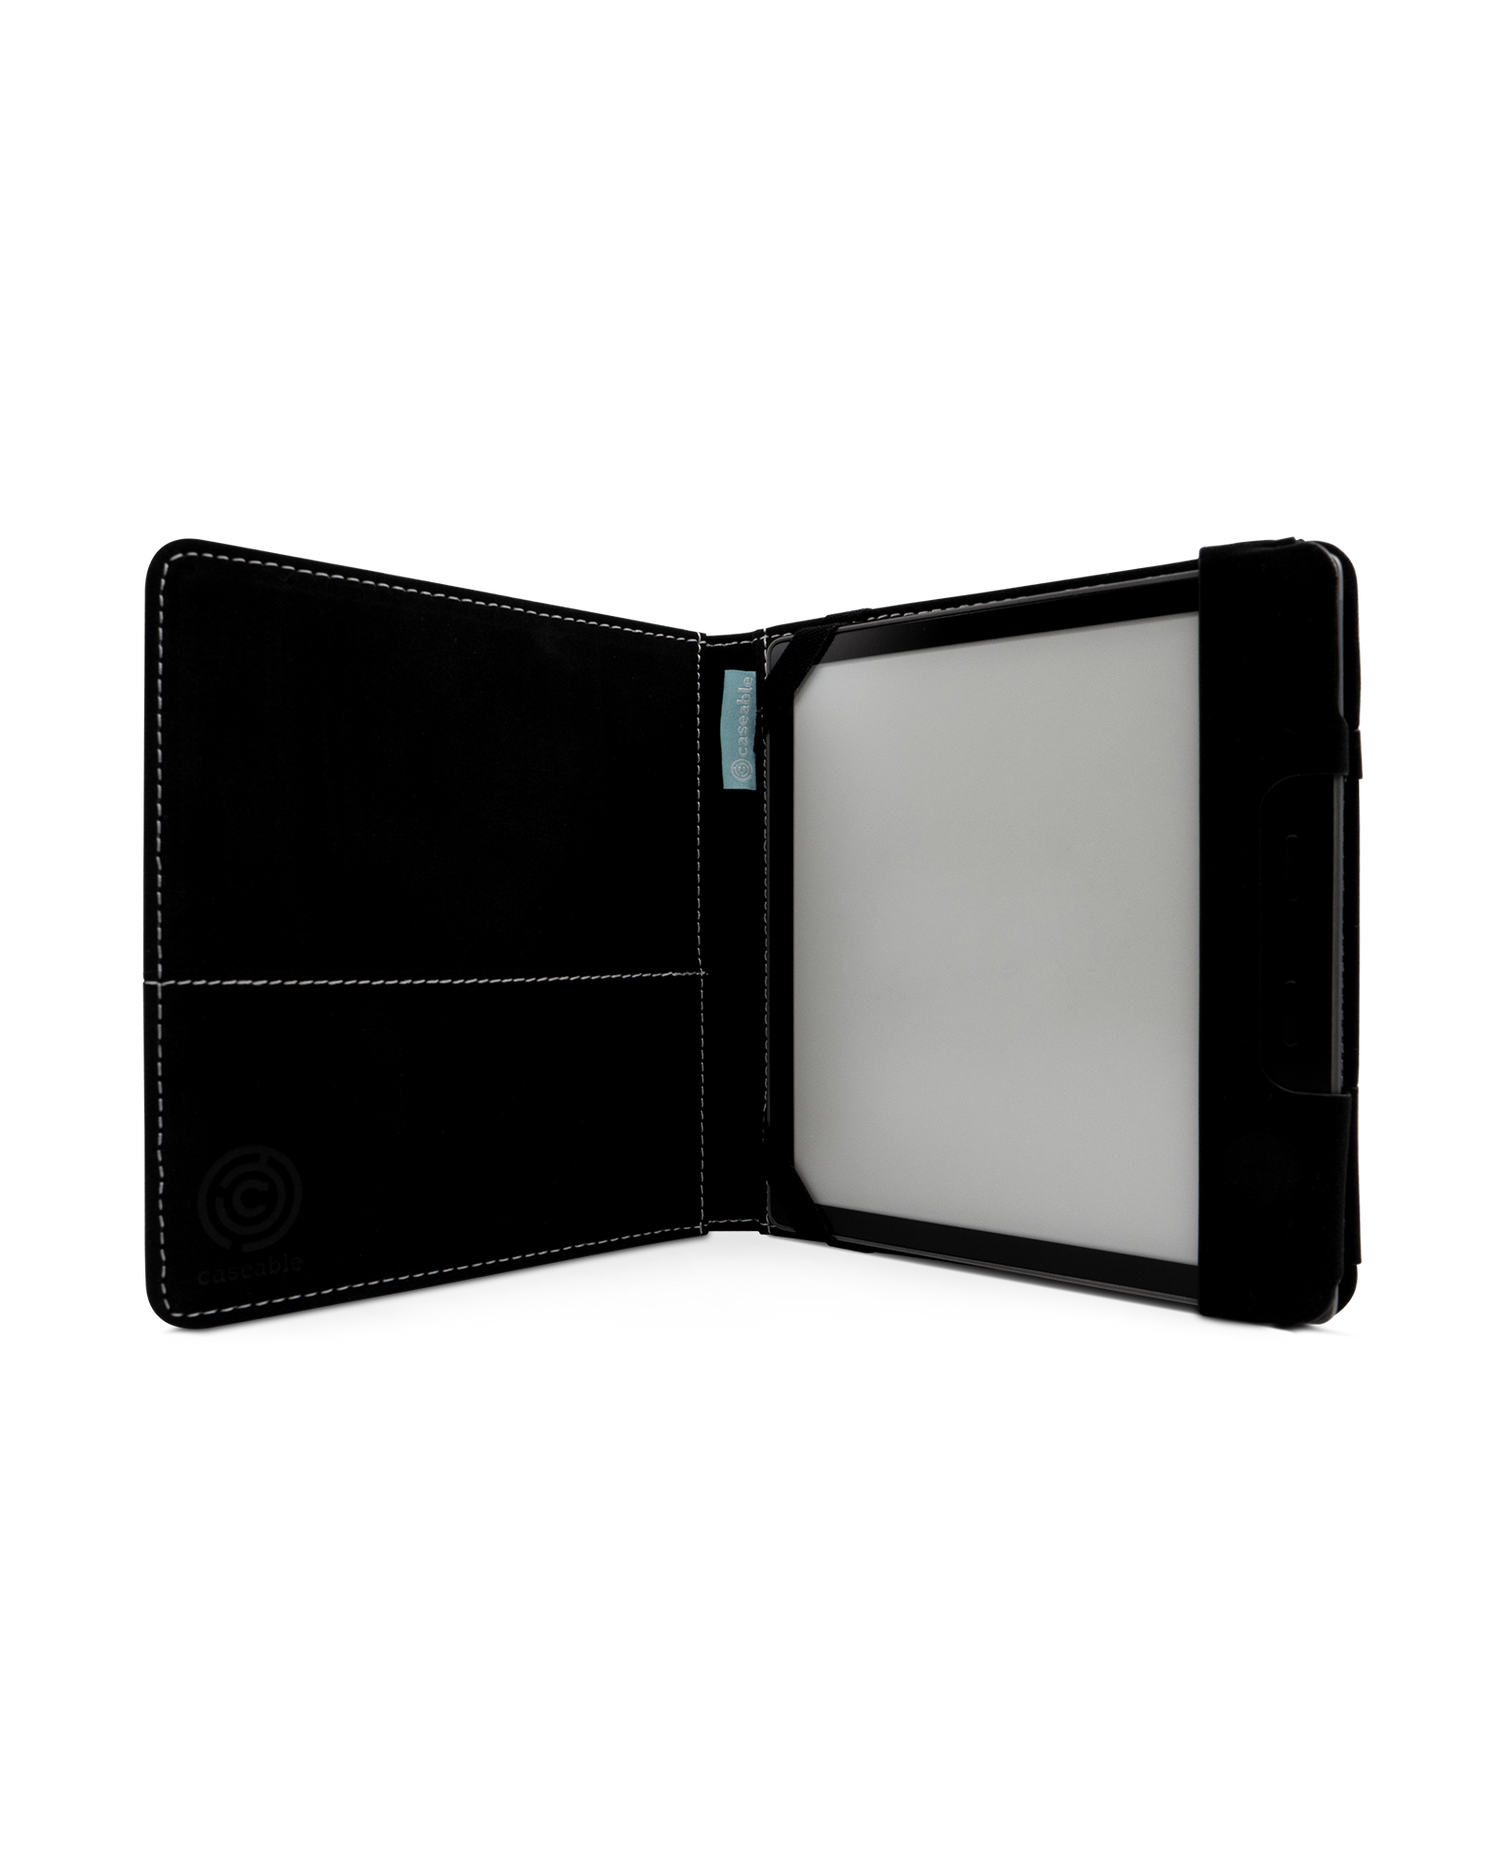 Ash eReader Case for tolino vision 6: Opened interior view